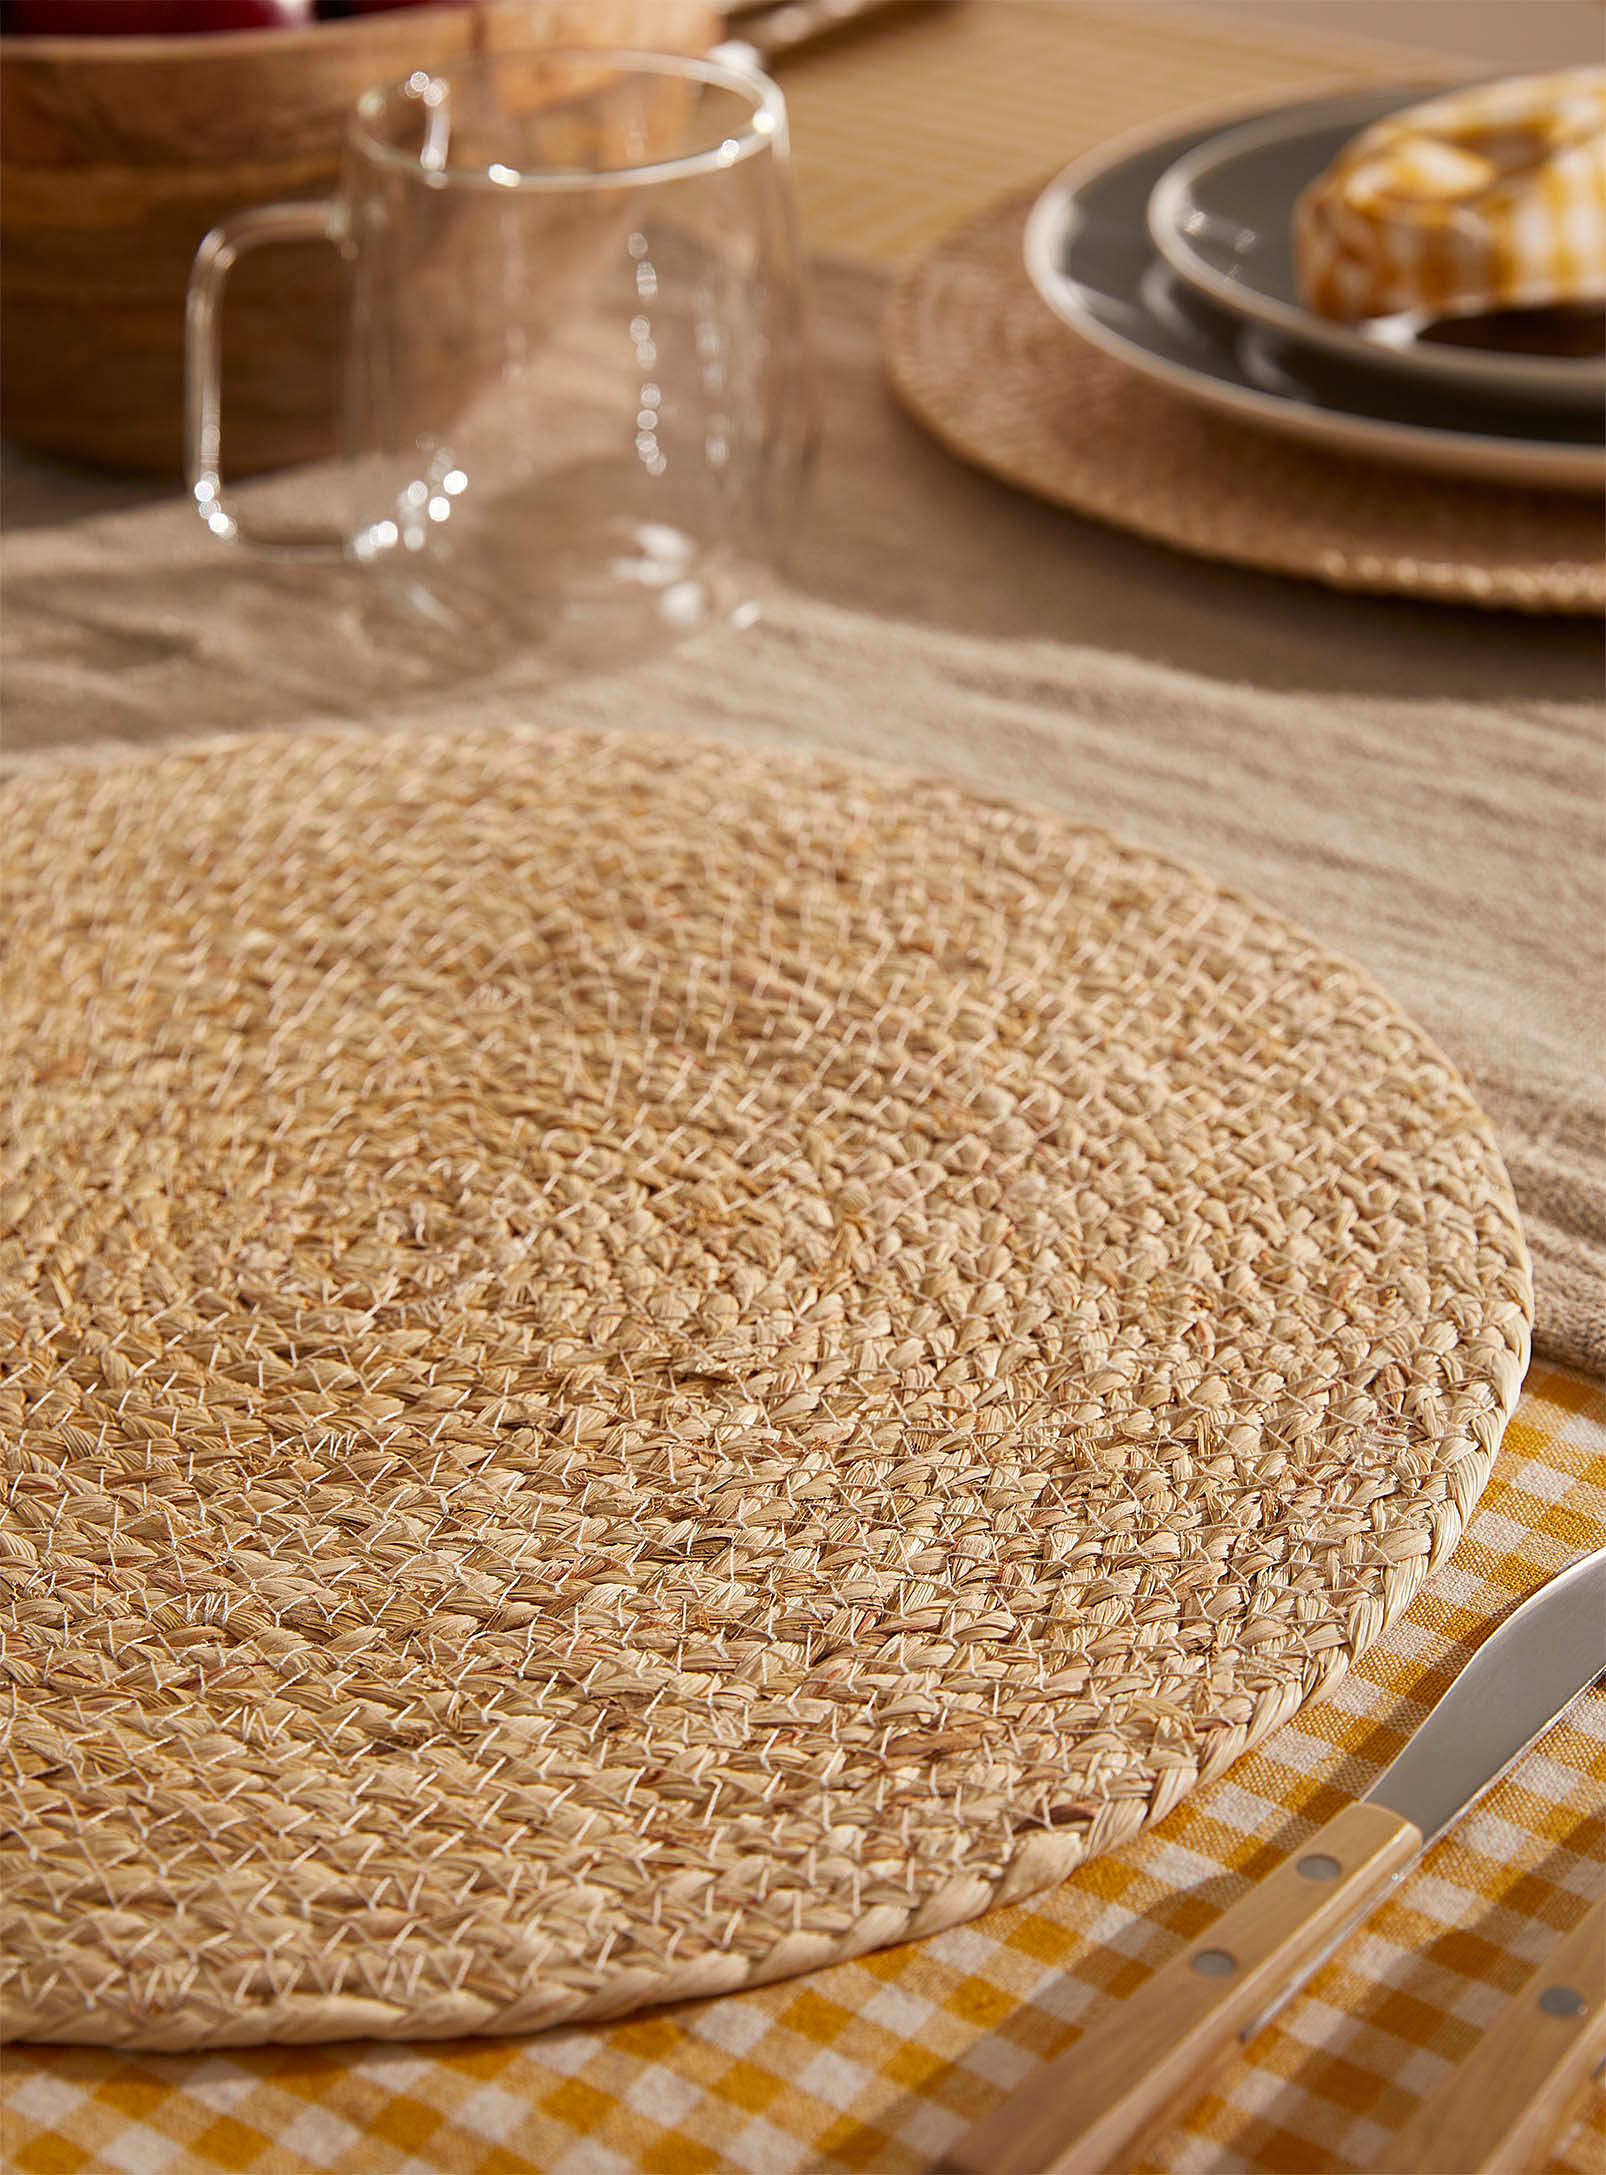 Simons Maison - Braided natural straw placemat